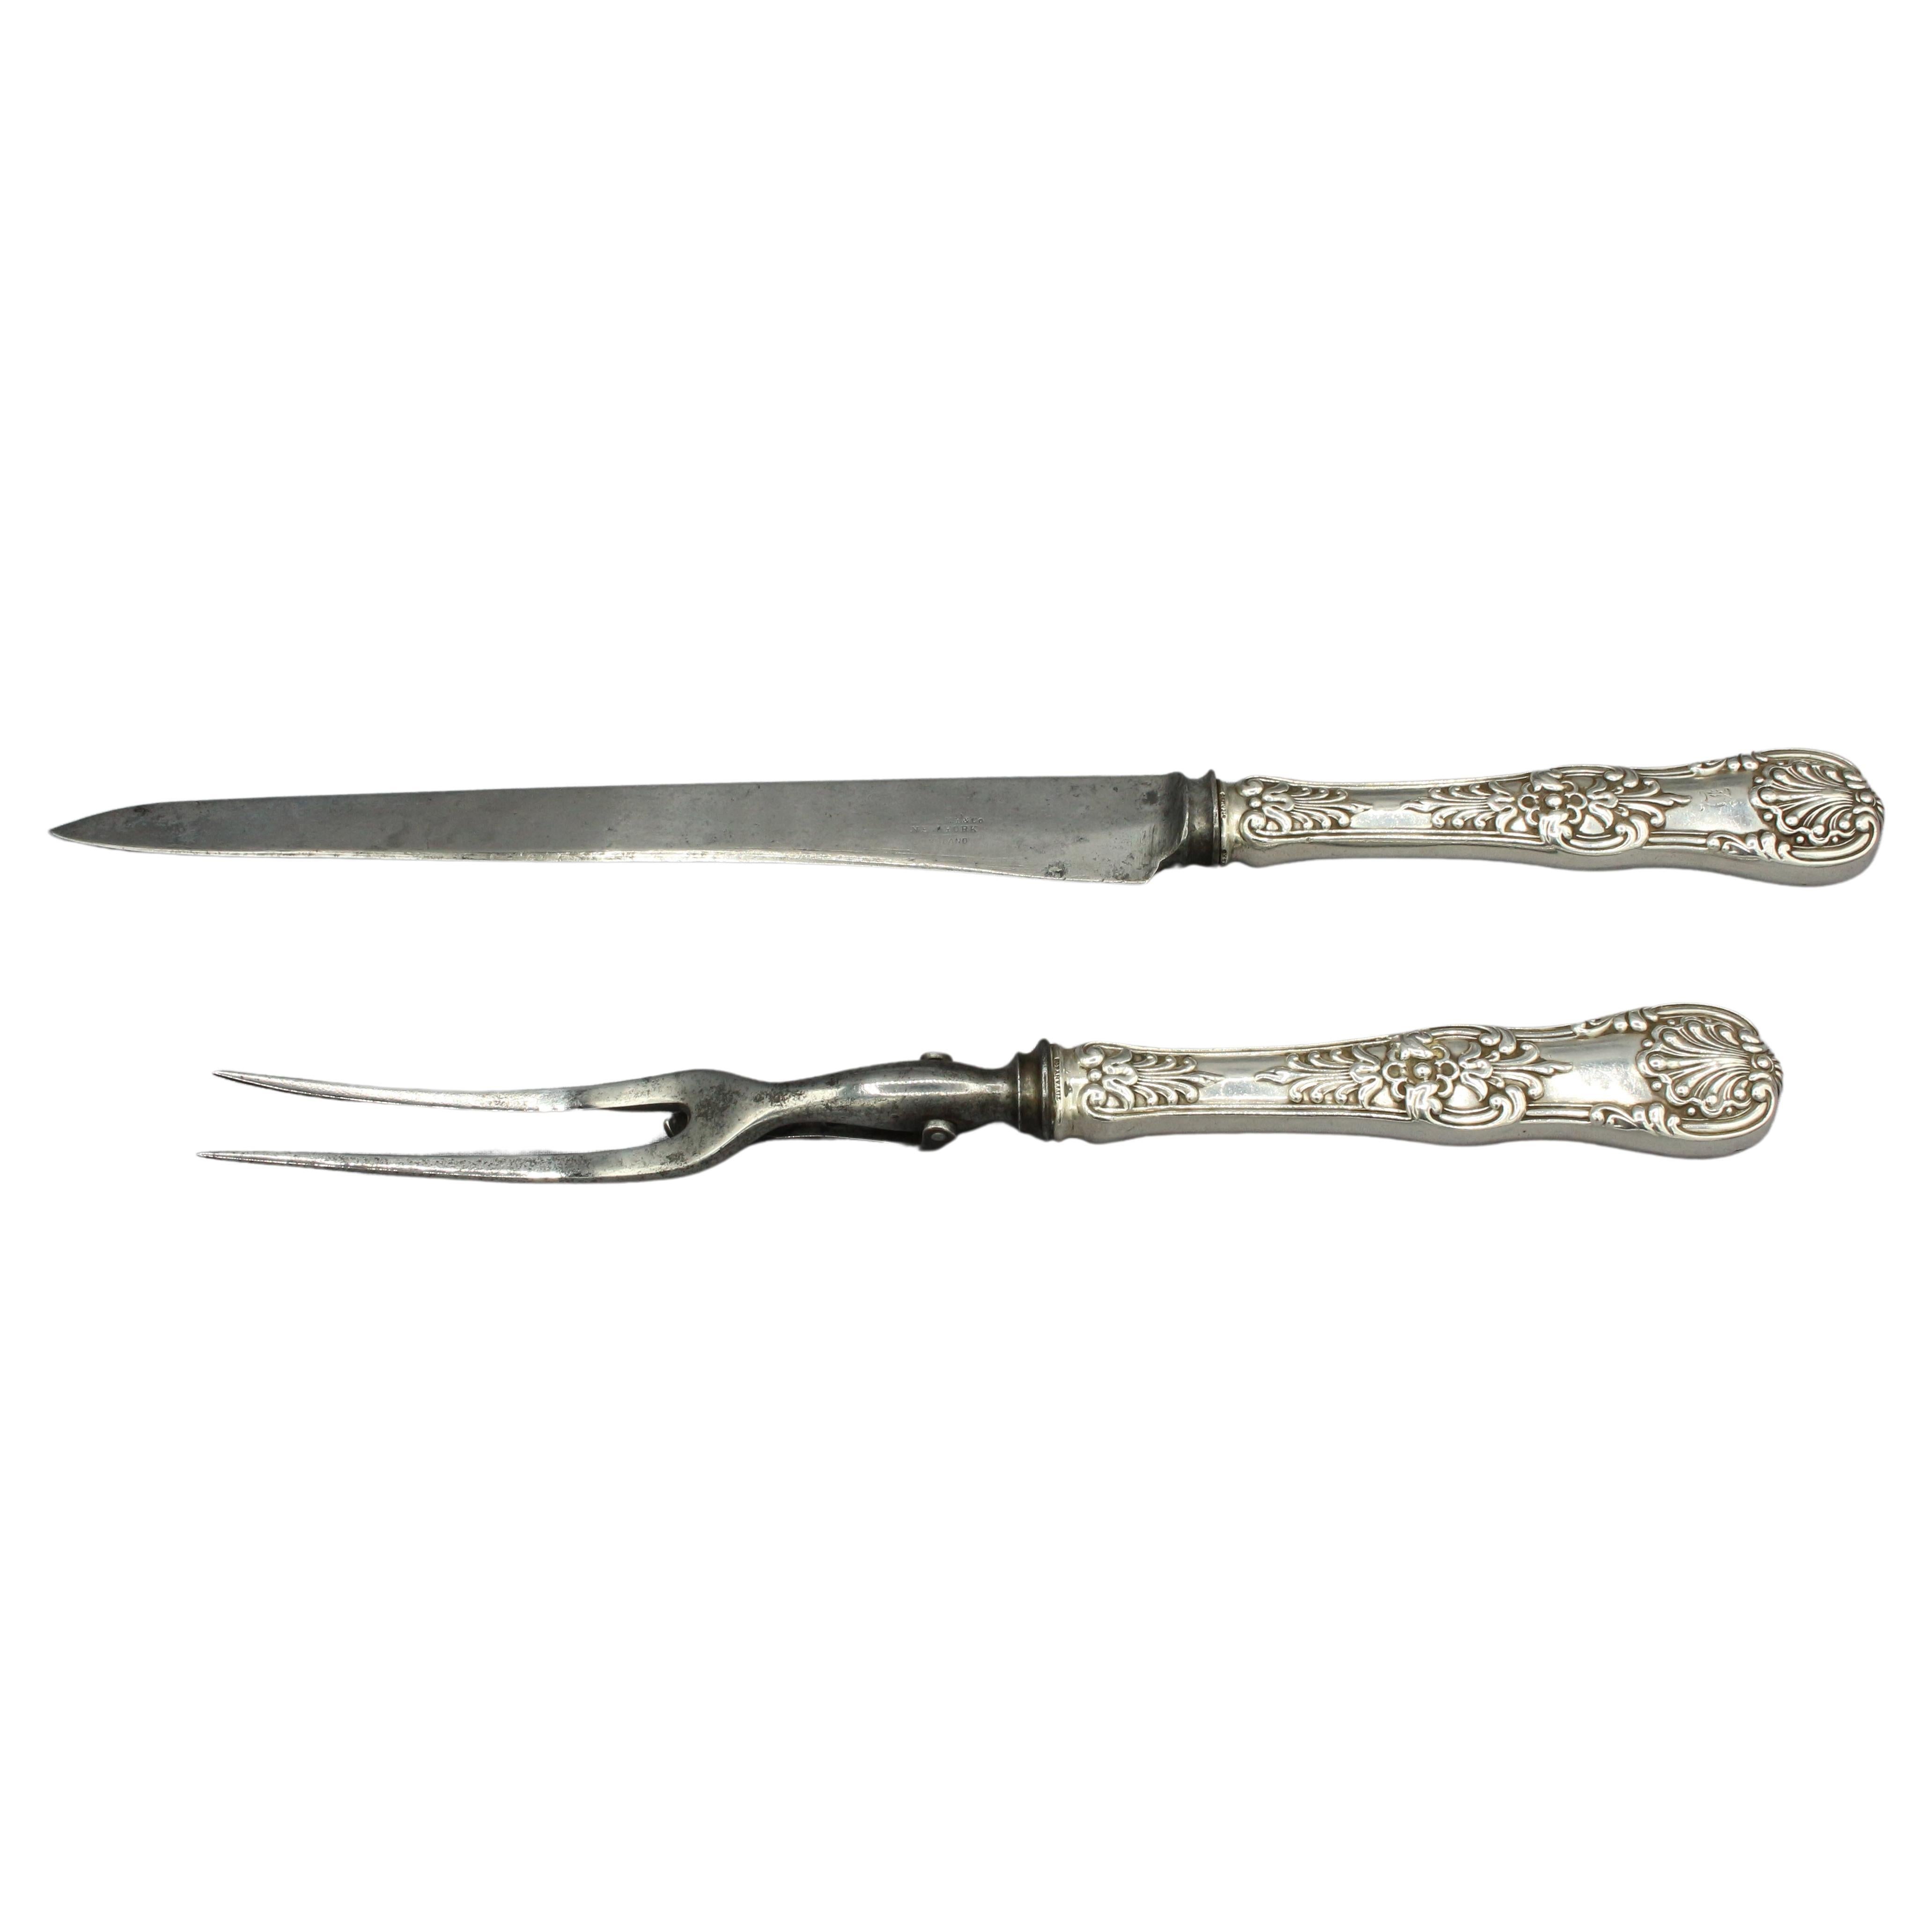 c. 1890s Tiffany & Co. Sterling Silver Carving Set